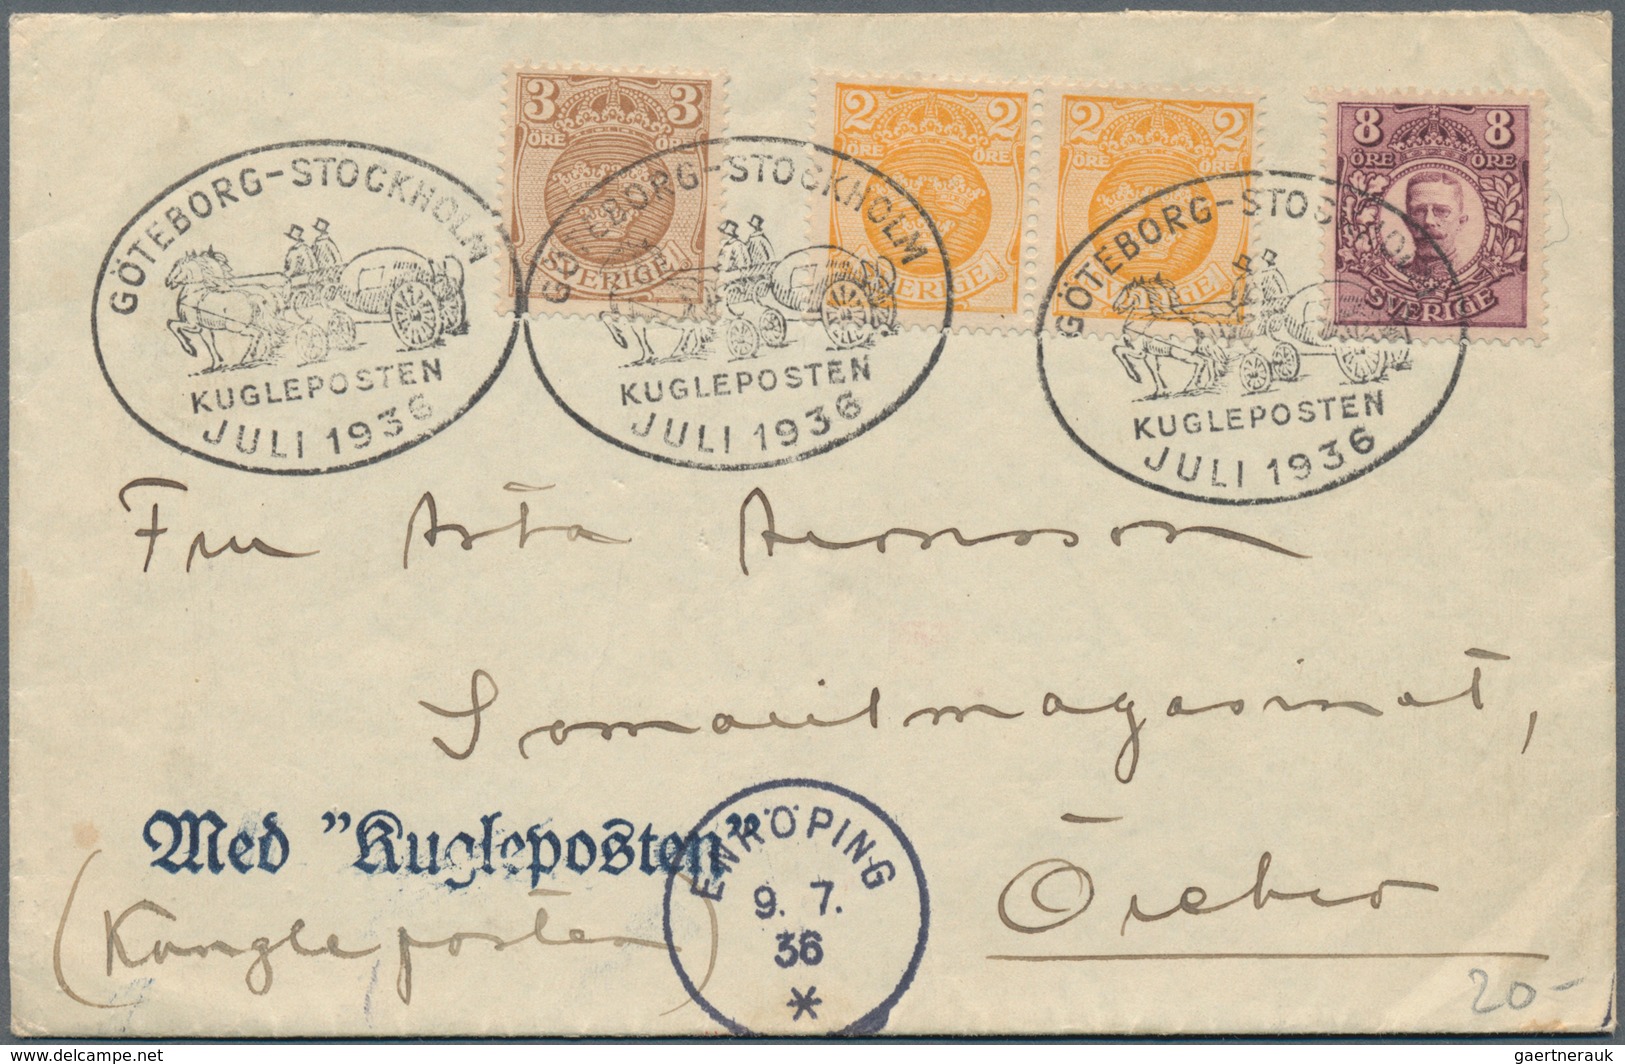 Schweden: 1870-1950's, group of 48 covers, postcards and postal stationery items including attractiv